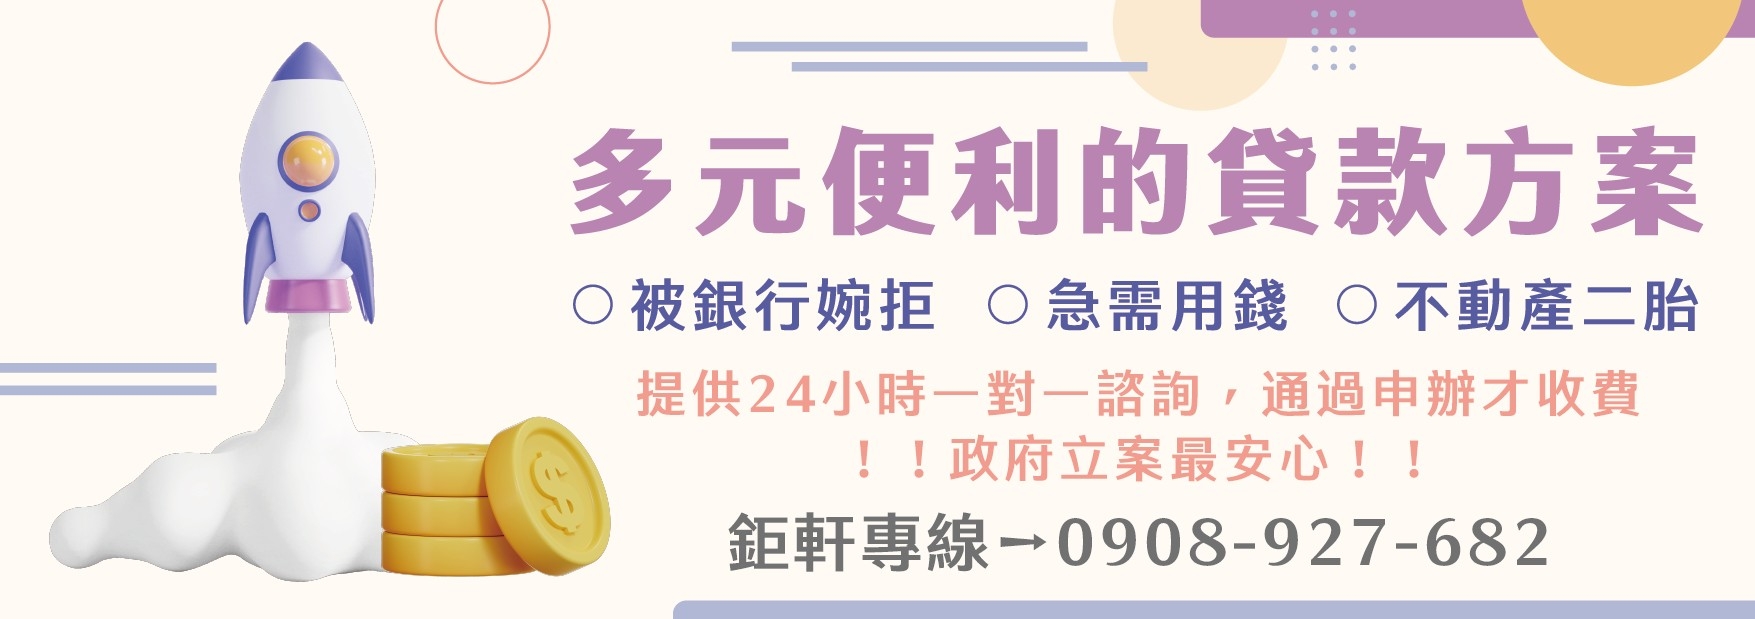 What are the conditions of Taoyuan mortgage bank? What is the highest mortgage percentage that can be borrowed?